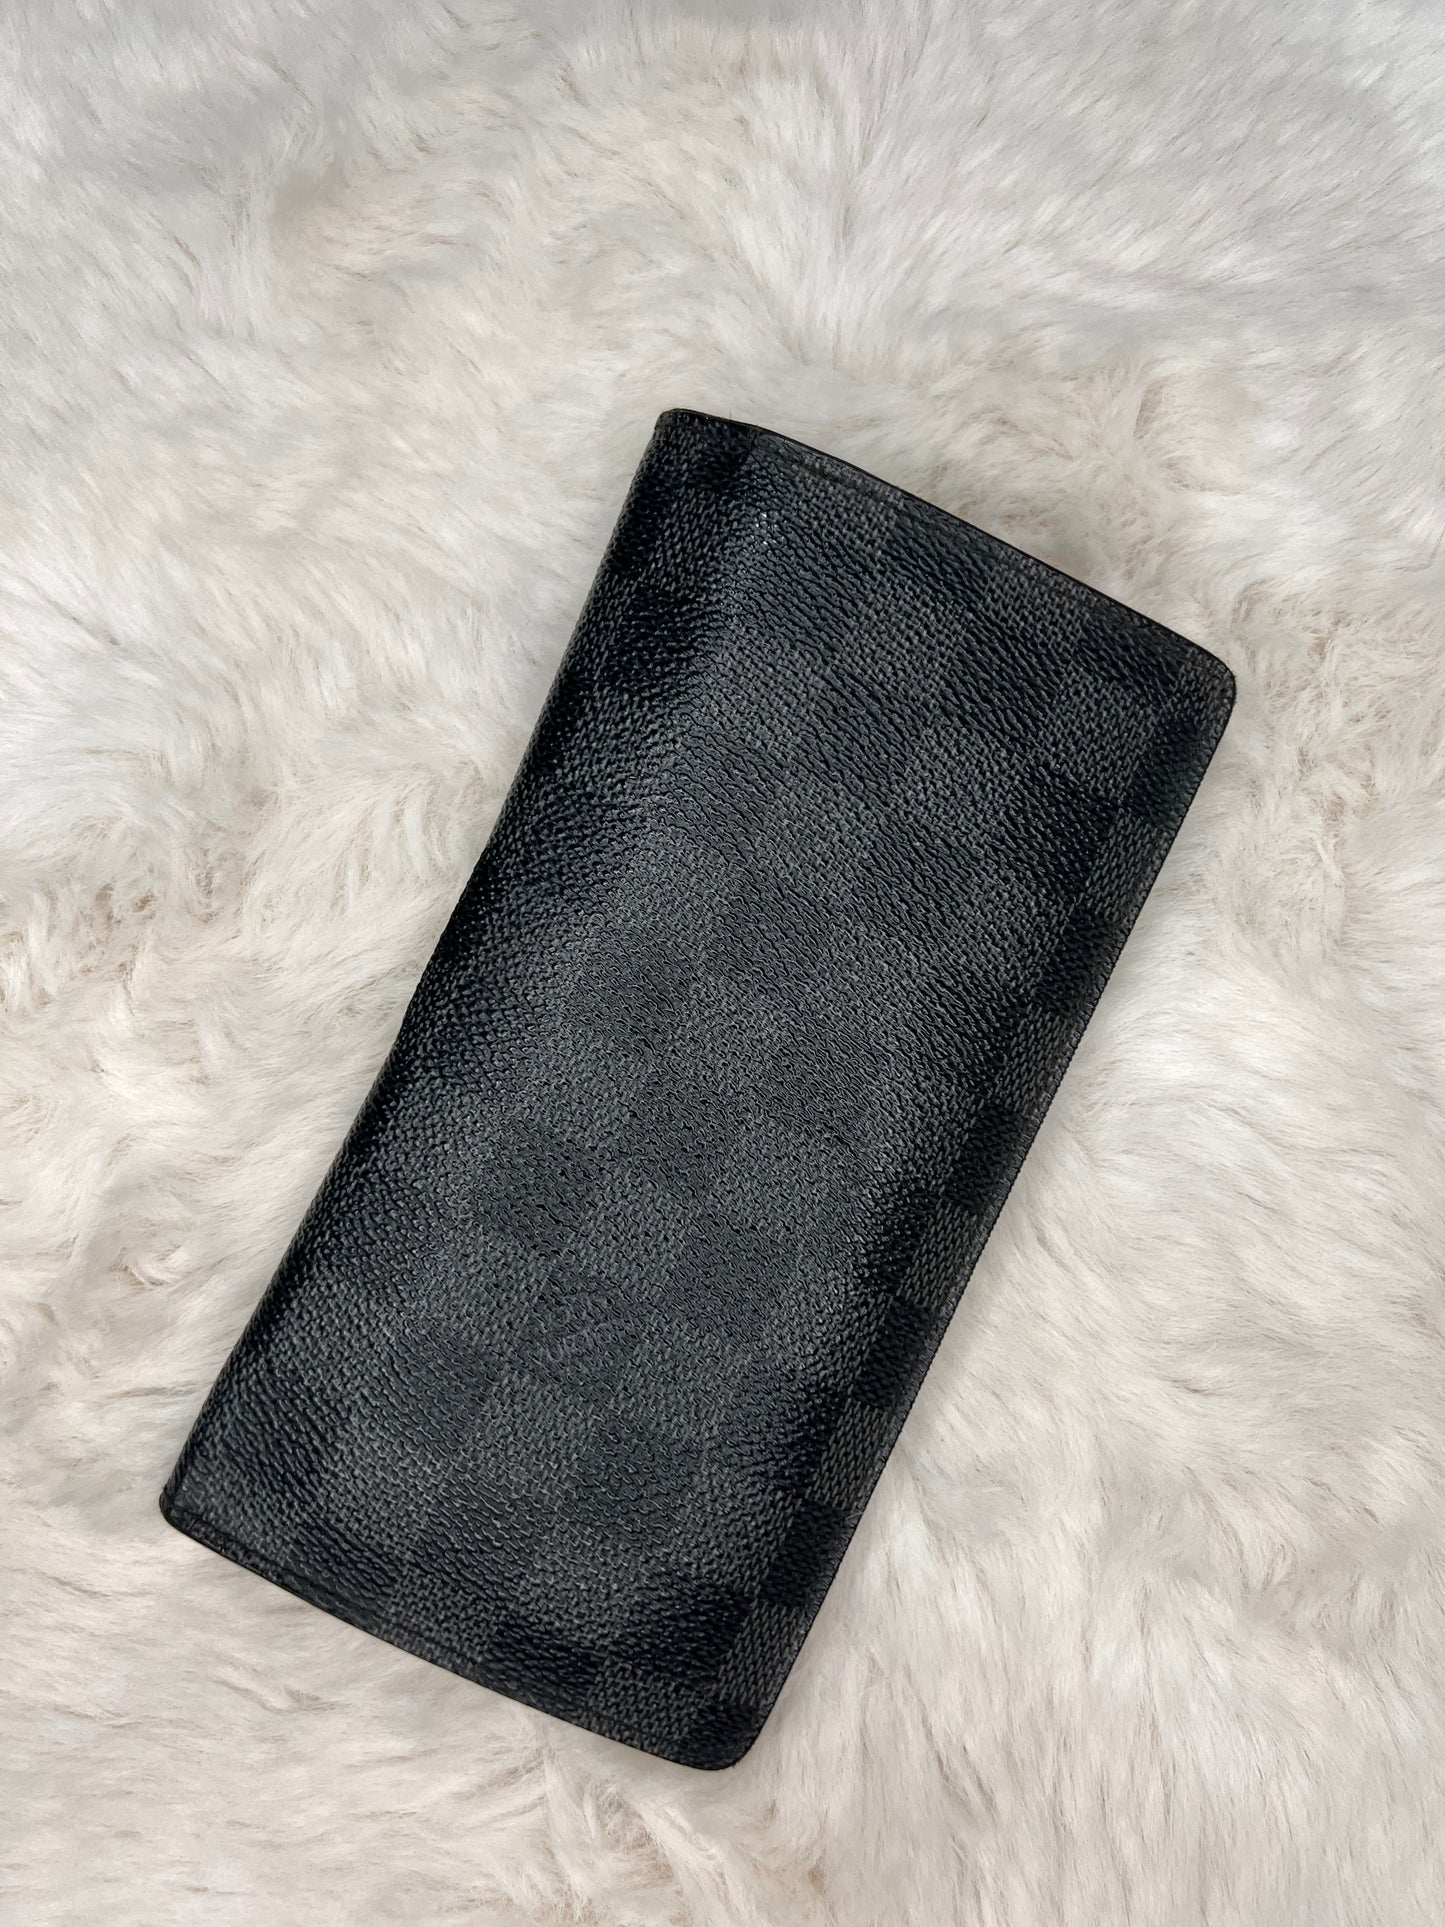 Damier Graphite Portefeuille Brother Wallet - $165 plus $10 shipping